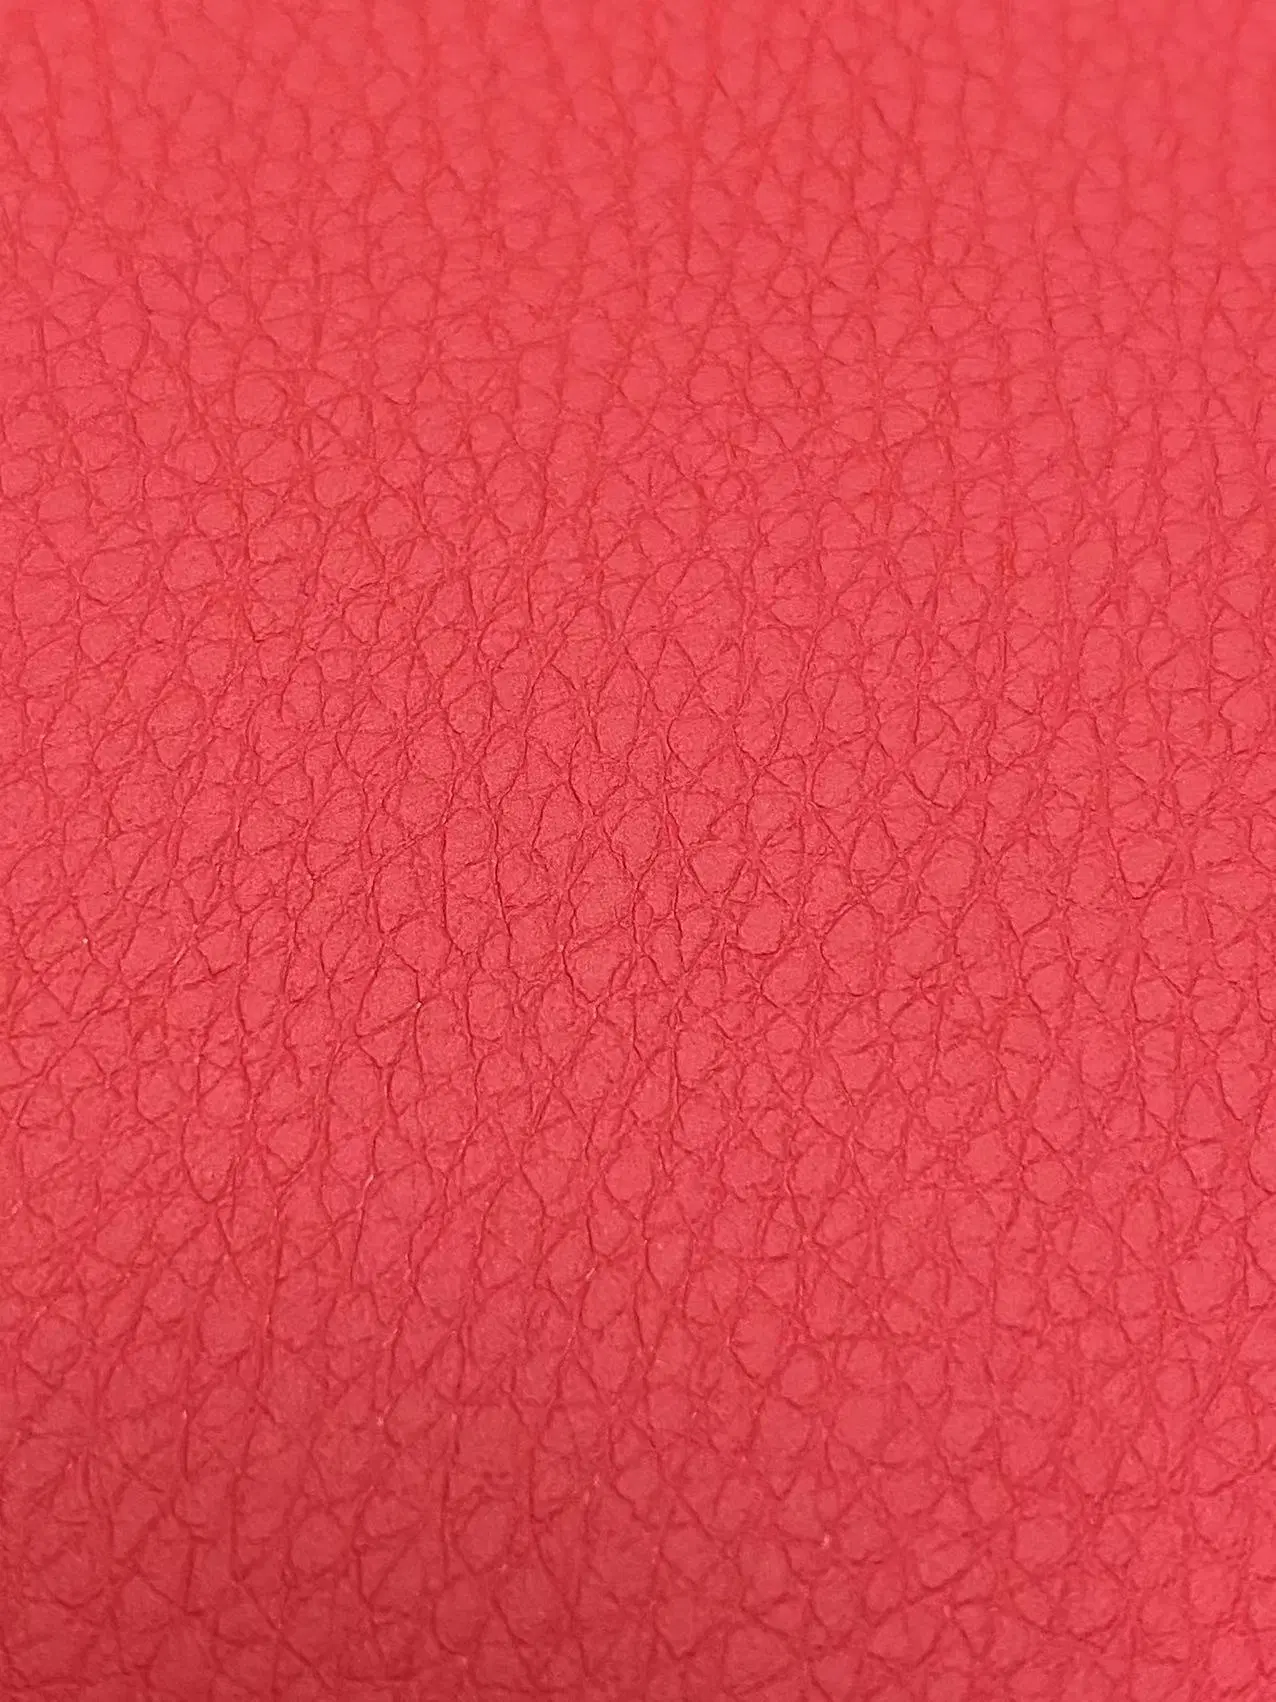 Coated Nylon Fabric Microfibre Leather Huafon High quality/High cost performance  Goods Reinforcement Nonwoven